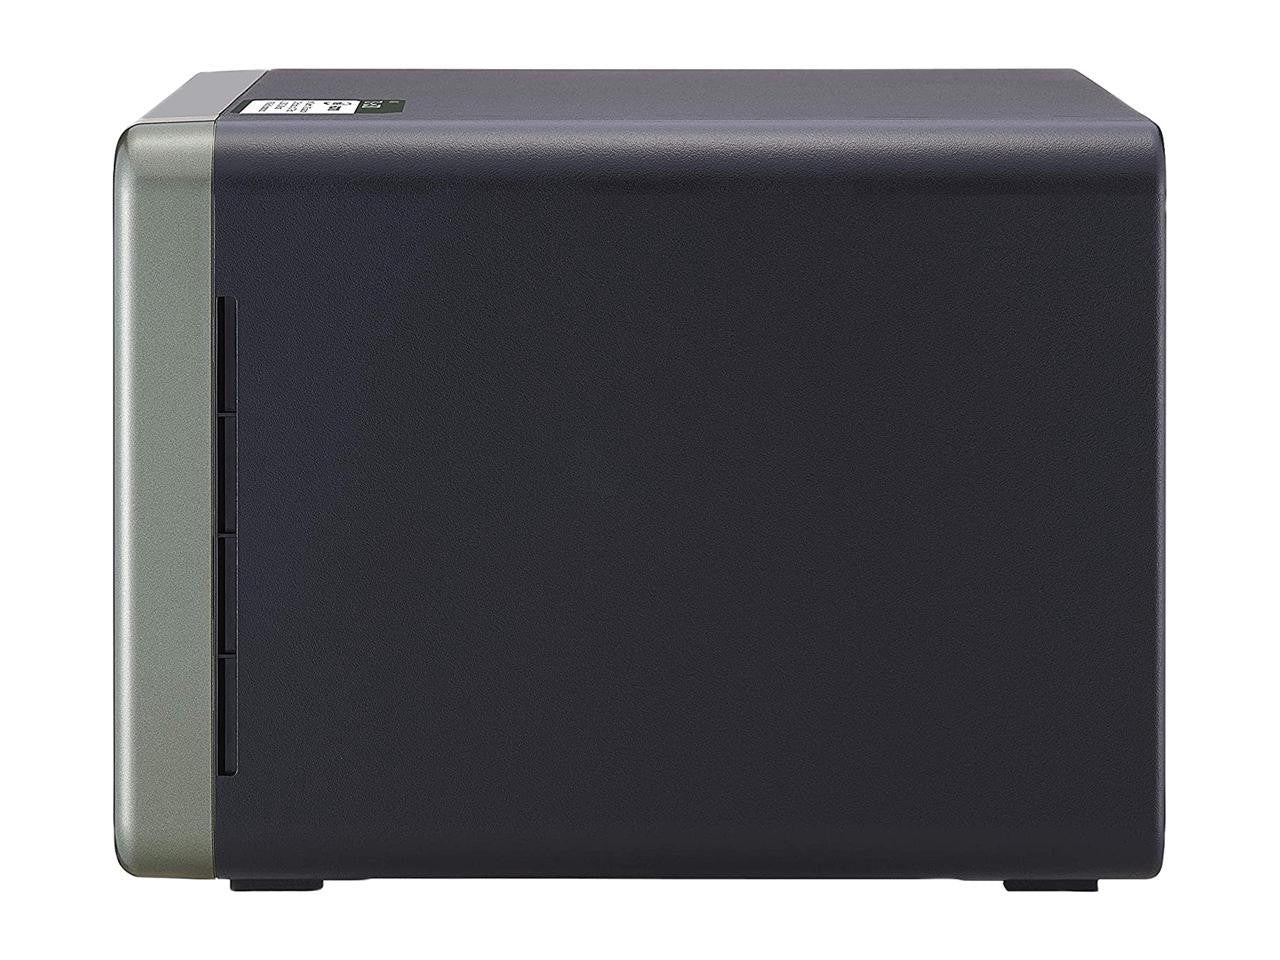 QNAP TS-253D Quad Core 2.7Ghz 2-Bay NAS with 4GB RAM and 12TB (2 x 6TB) of Seagate Ironwolf NAS Drives Fully Assembled and Tested By CustomTechSales